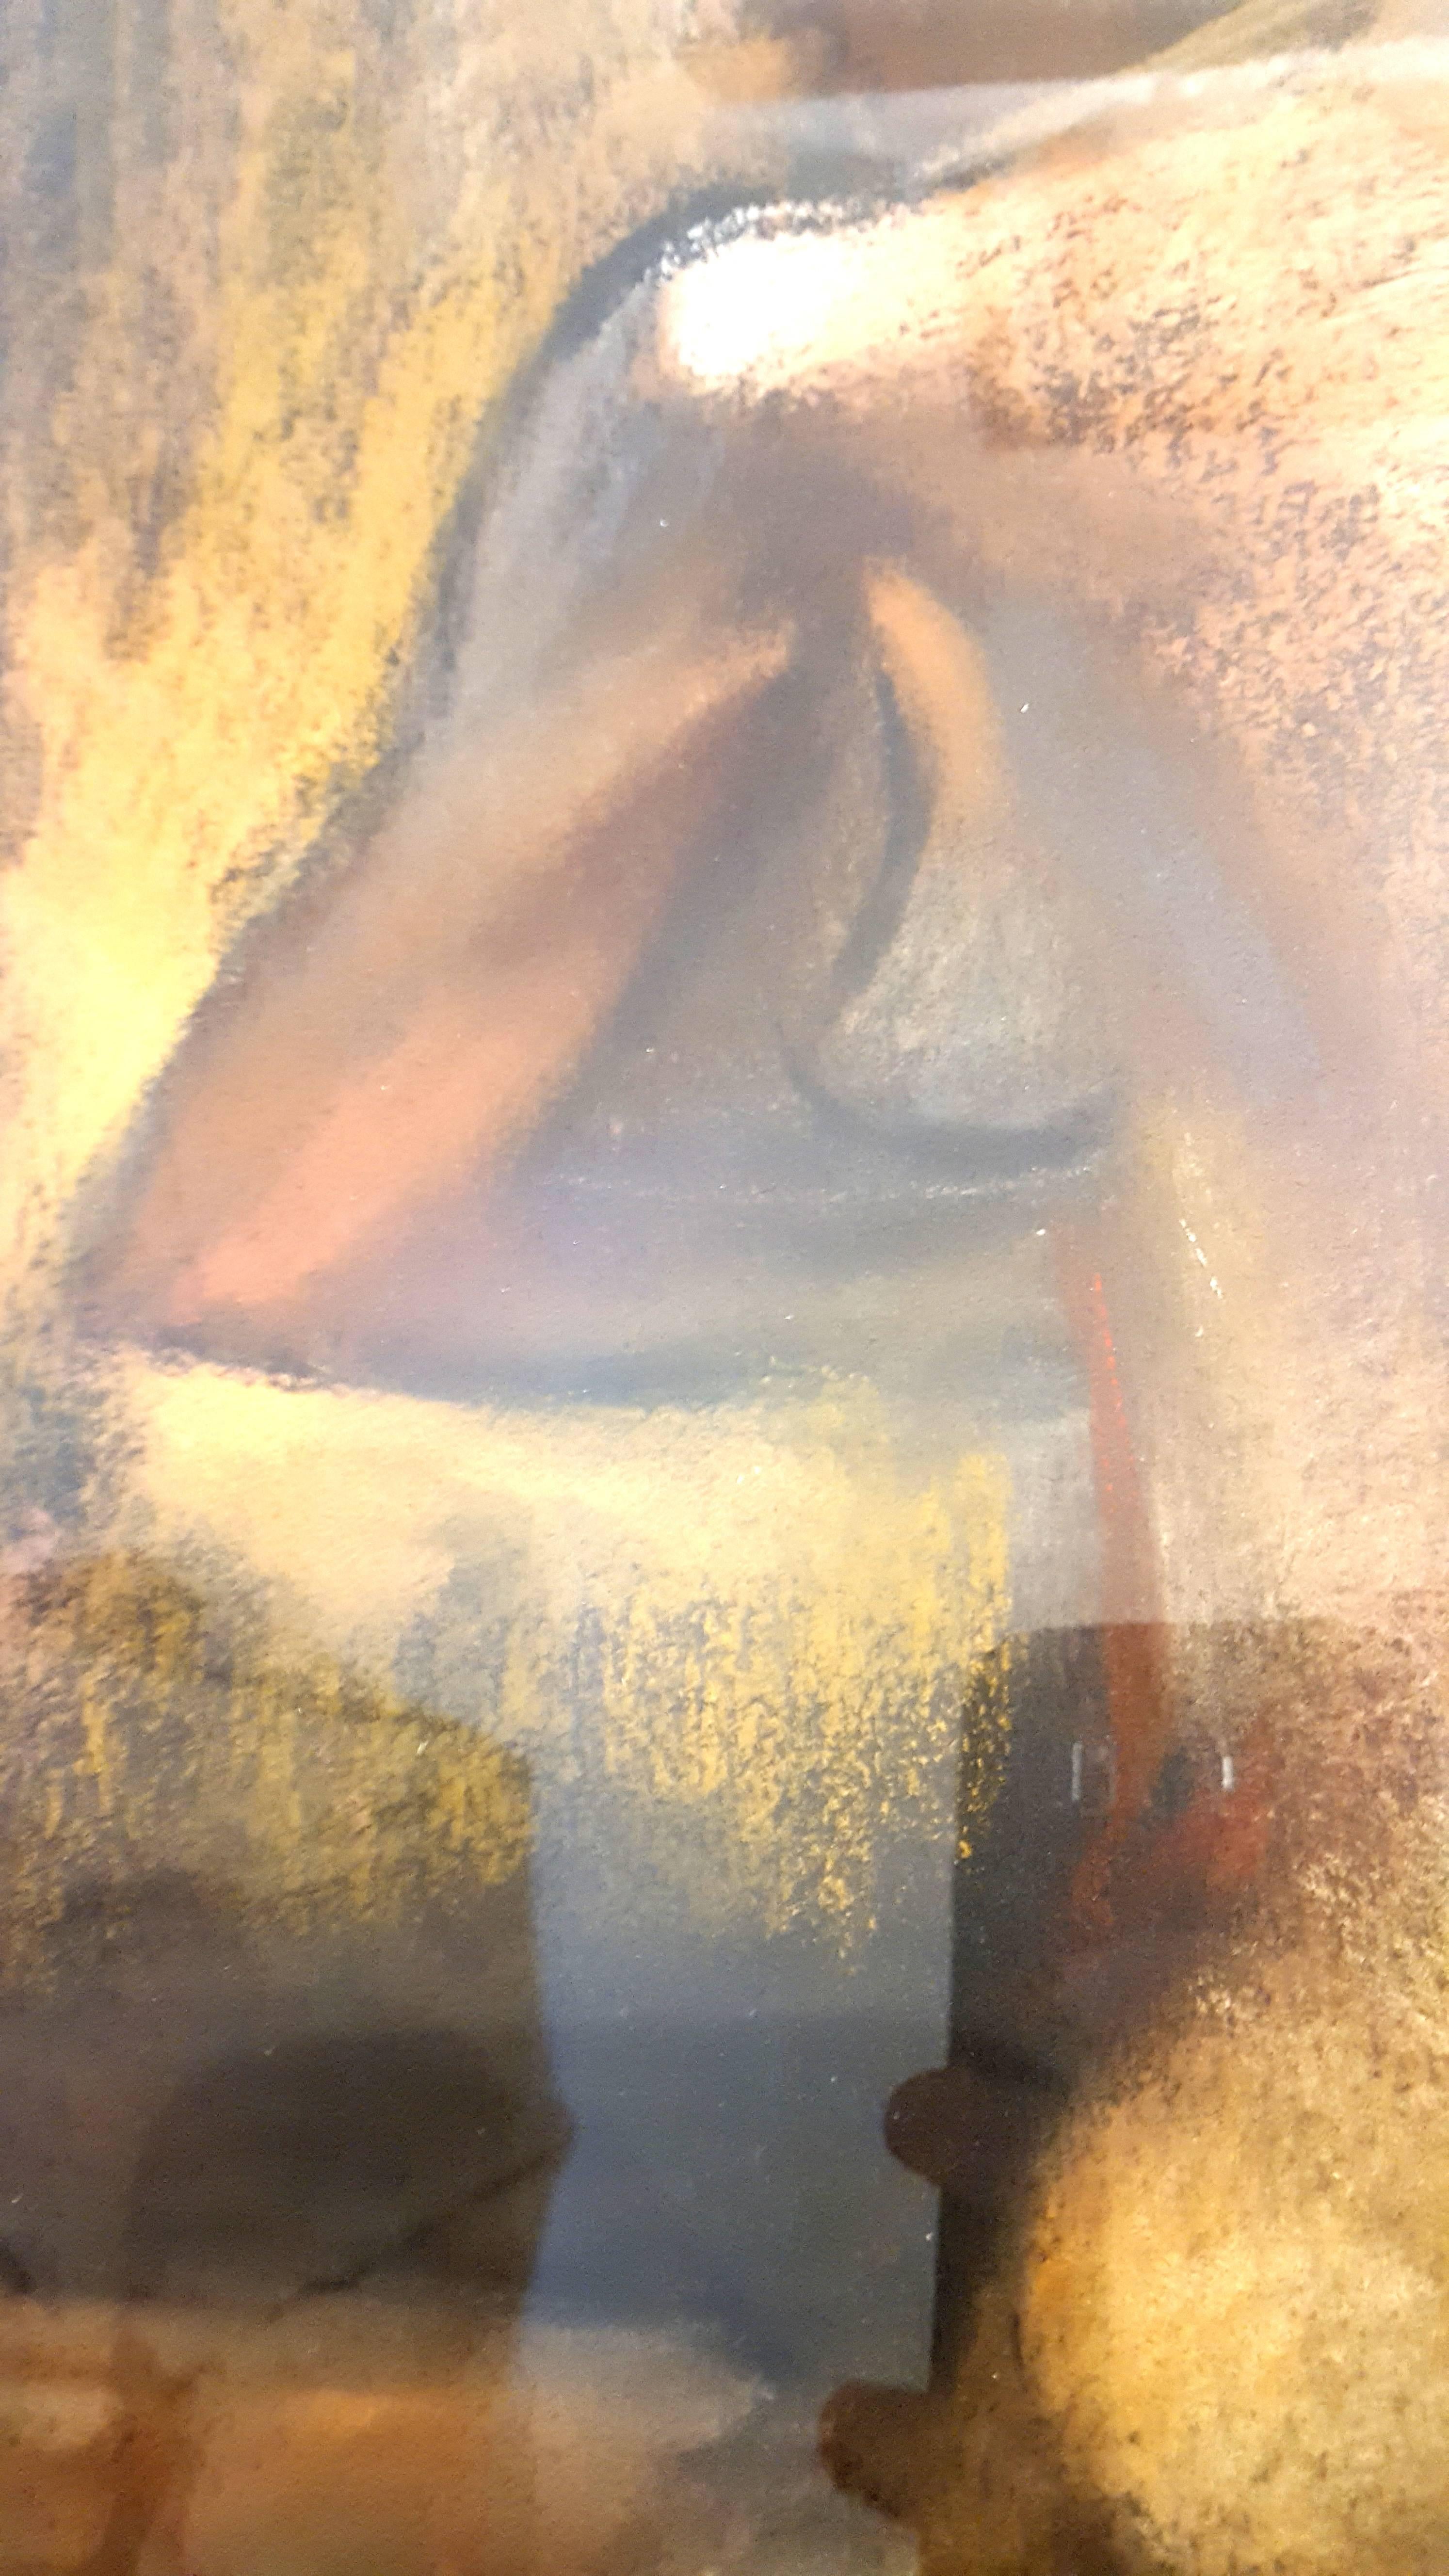 Original Signed Pastel on paper by André Lhote  
Title: Woman
Signed A.L
Dimensions: 43 x 33,5 cm
Framed

Biography of André Lhote

One of the most thoughtful and versatile of modern artists, Andre Lhote was gifted in both painting and sculpture.